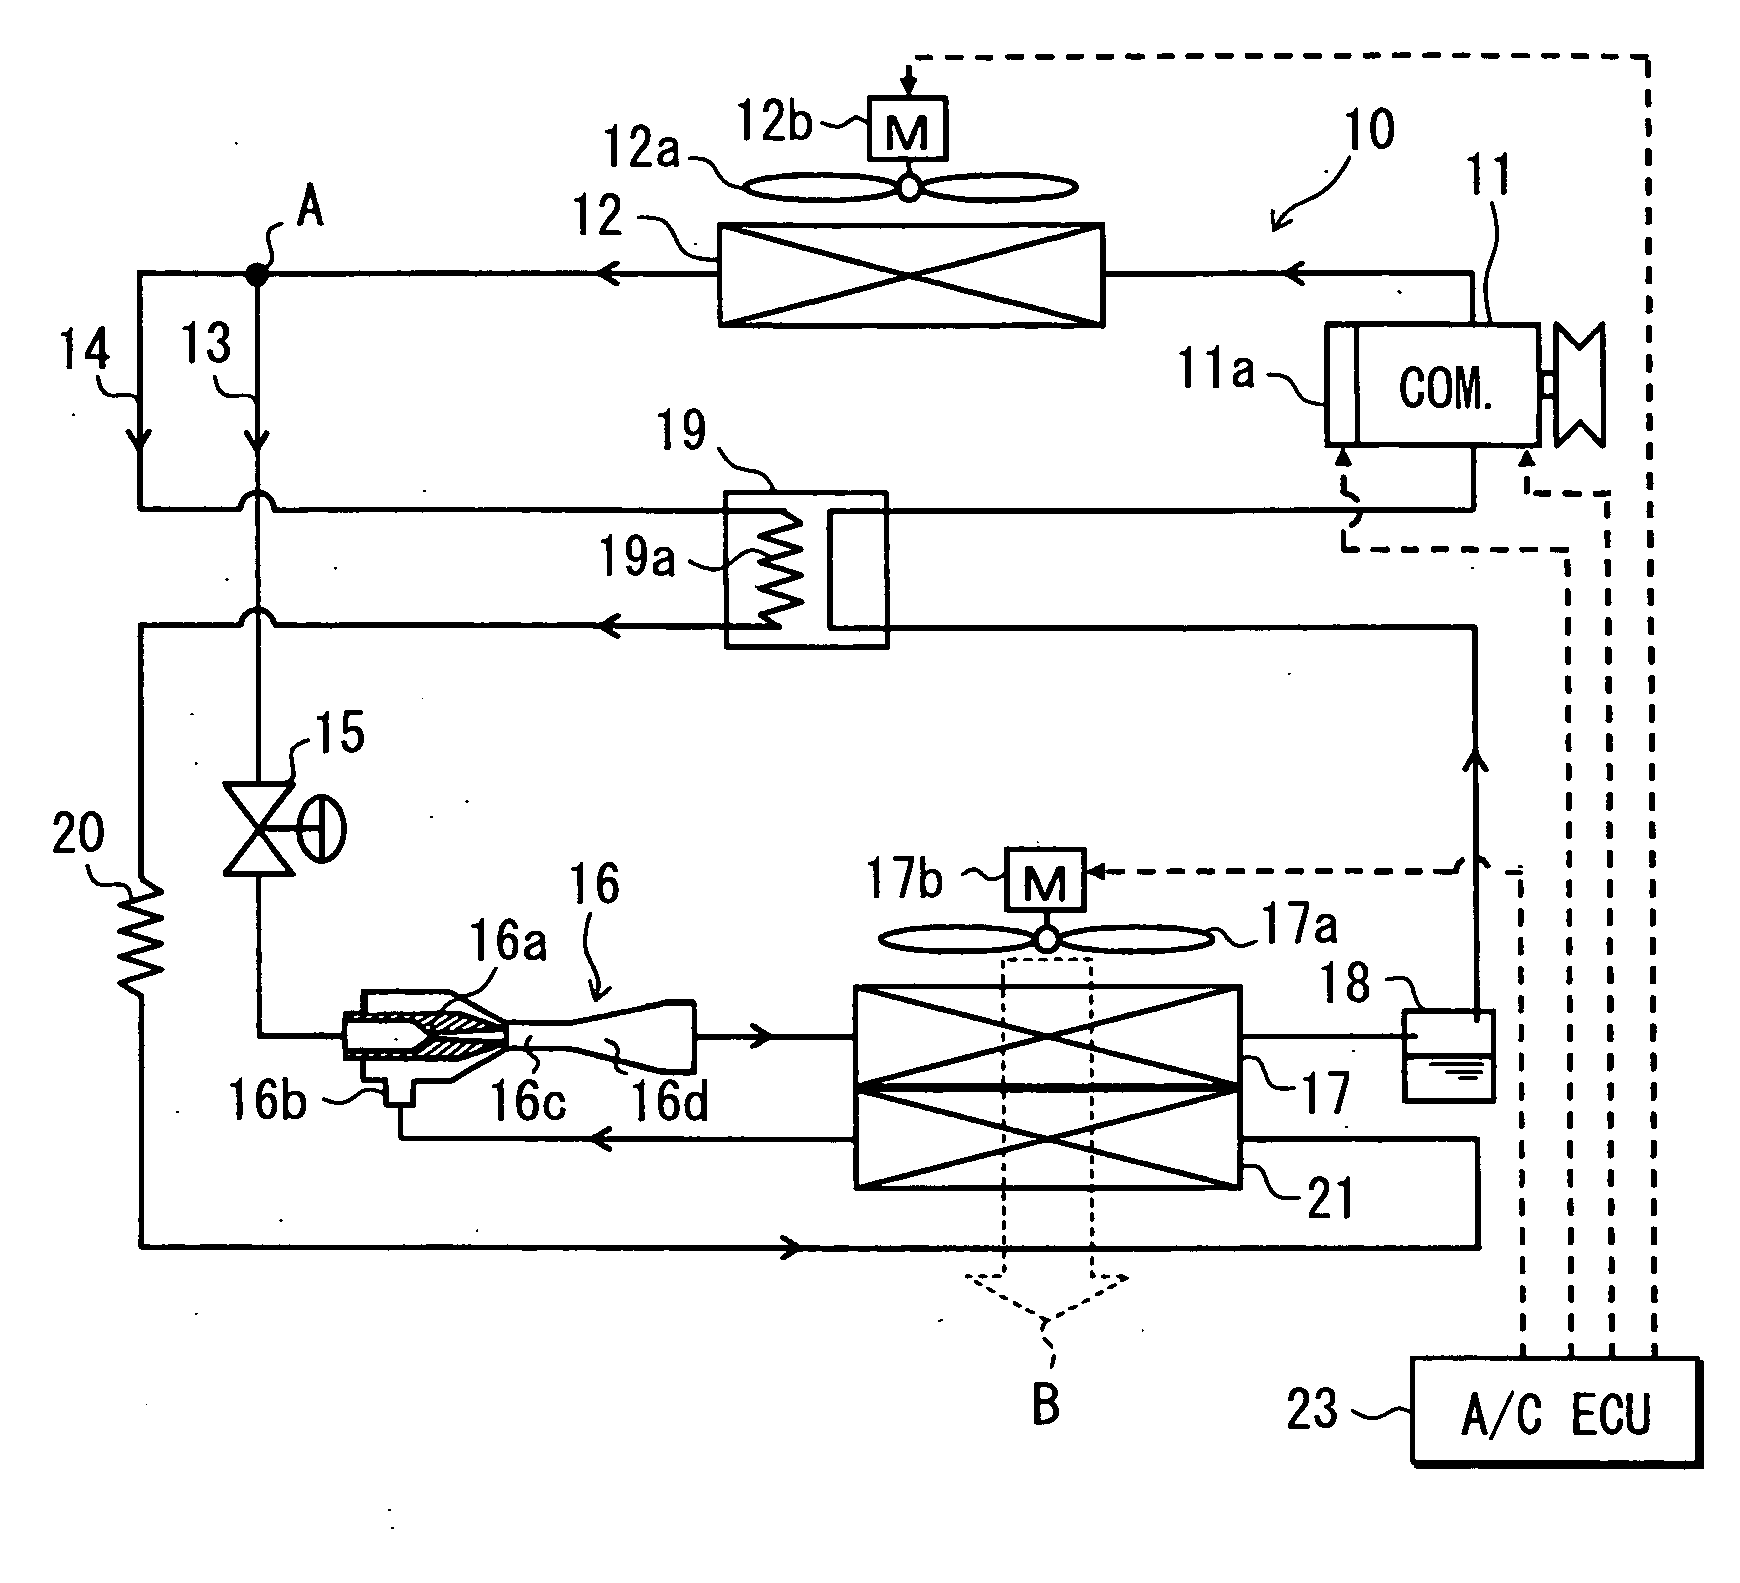 Ejector refrigerant cycle device